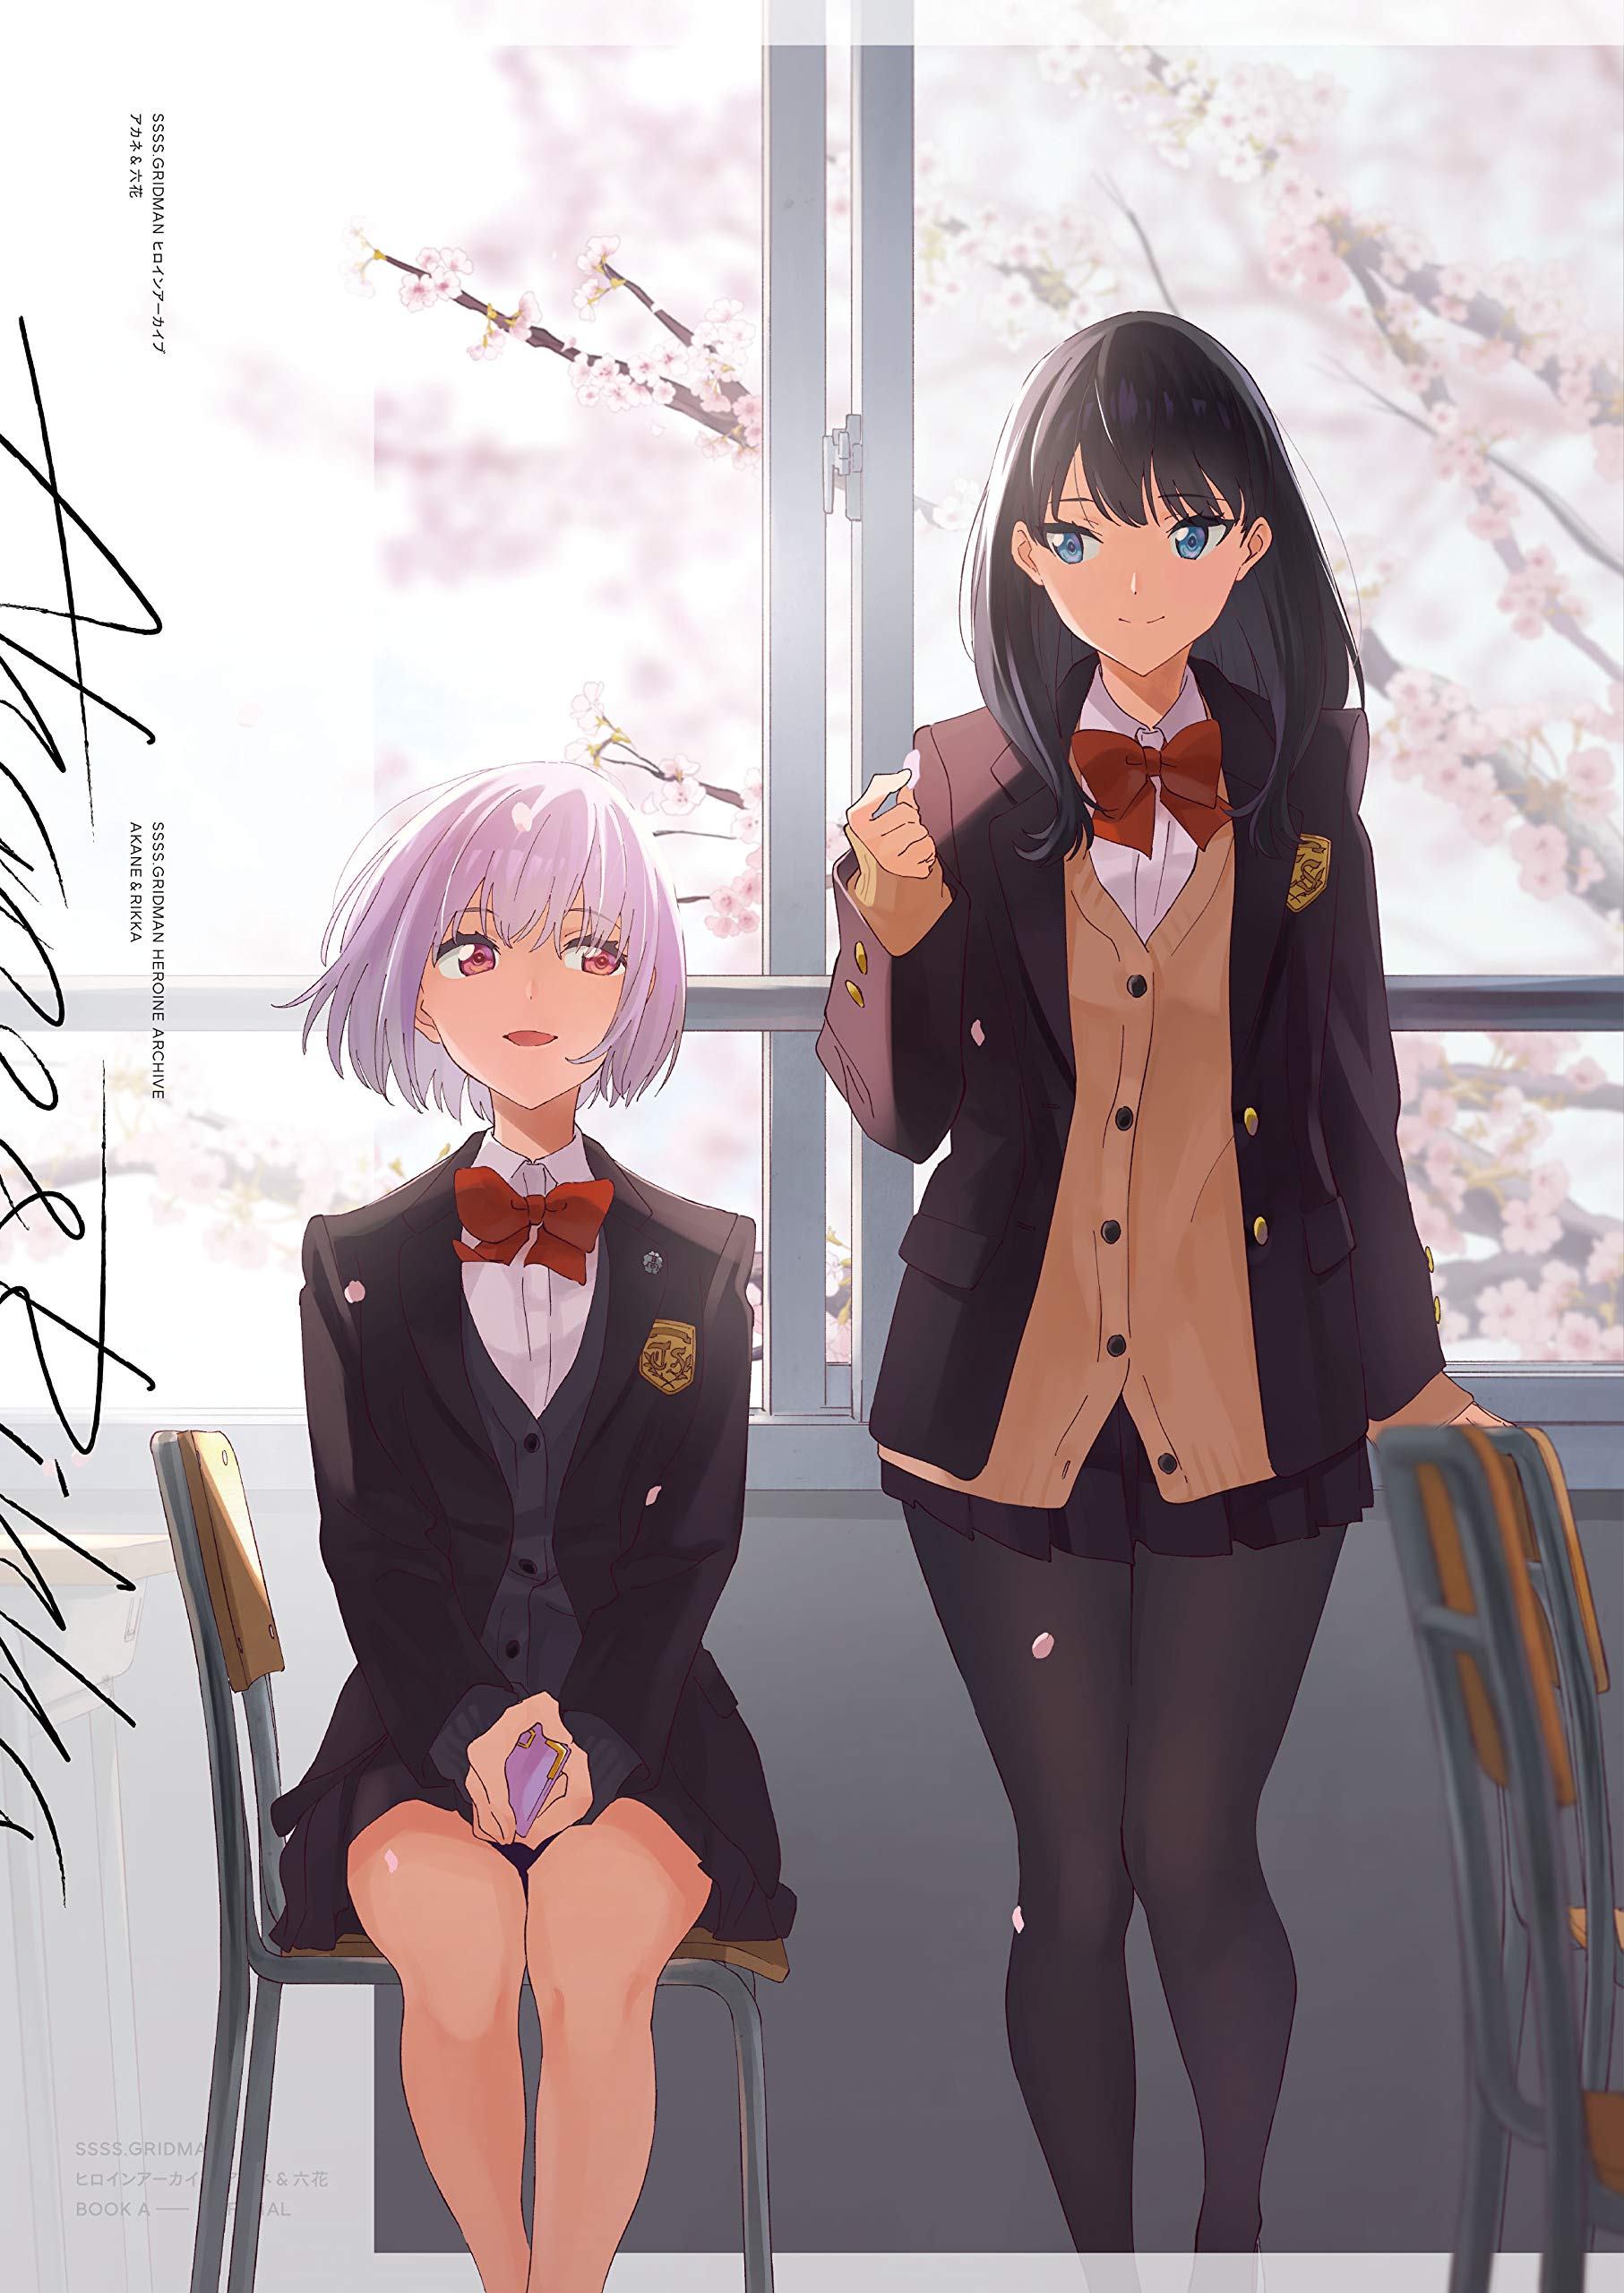 SSSS.Gridman Merchandise – Might as well be a blogger, right Shieboko?